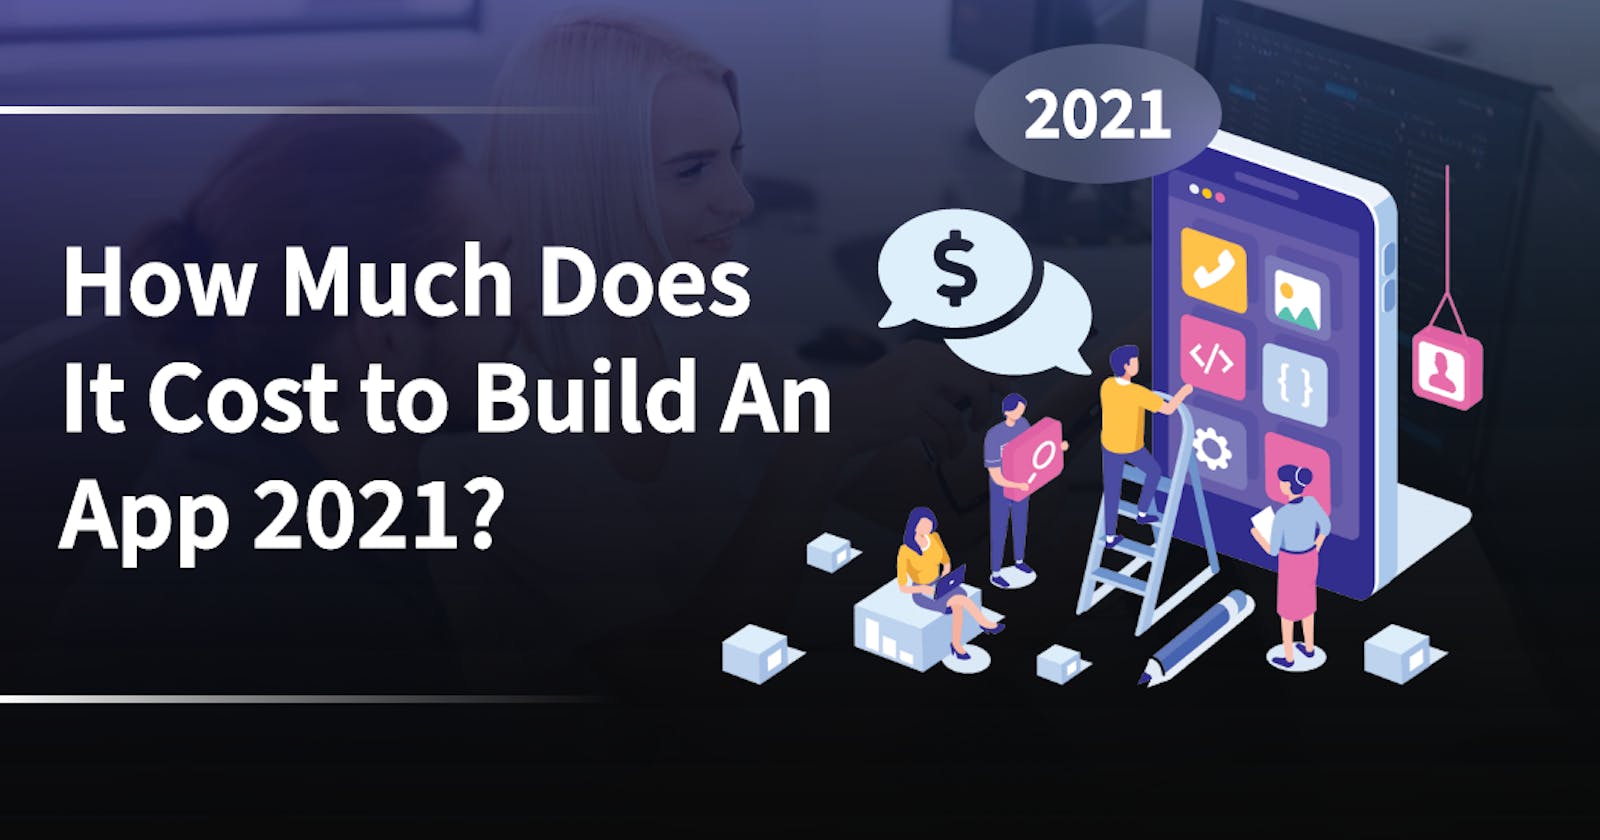 How Much Does It Cost to Build An App 2021?